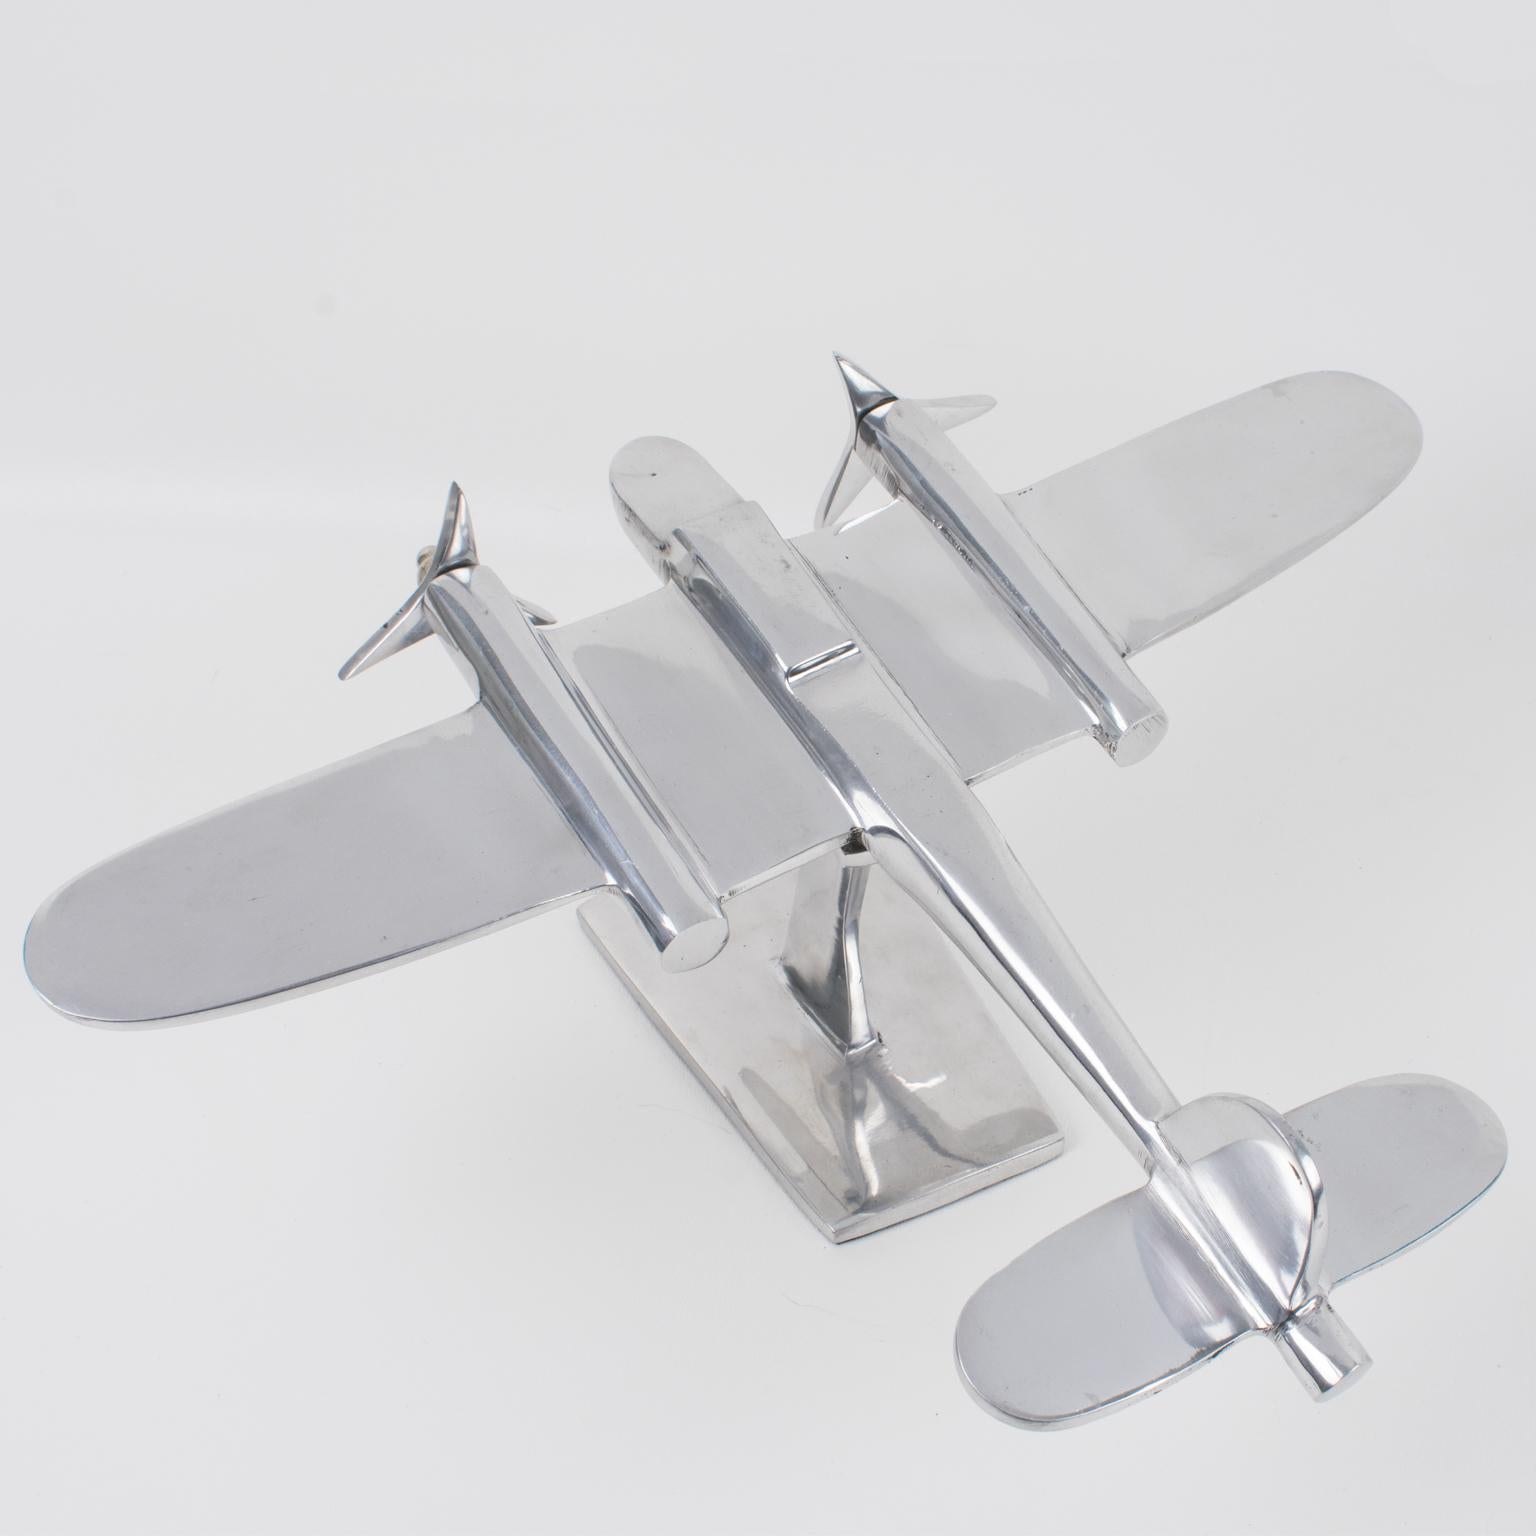 Metal French Aviation Polished Aluminum Airplane Model